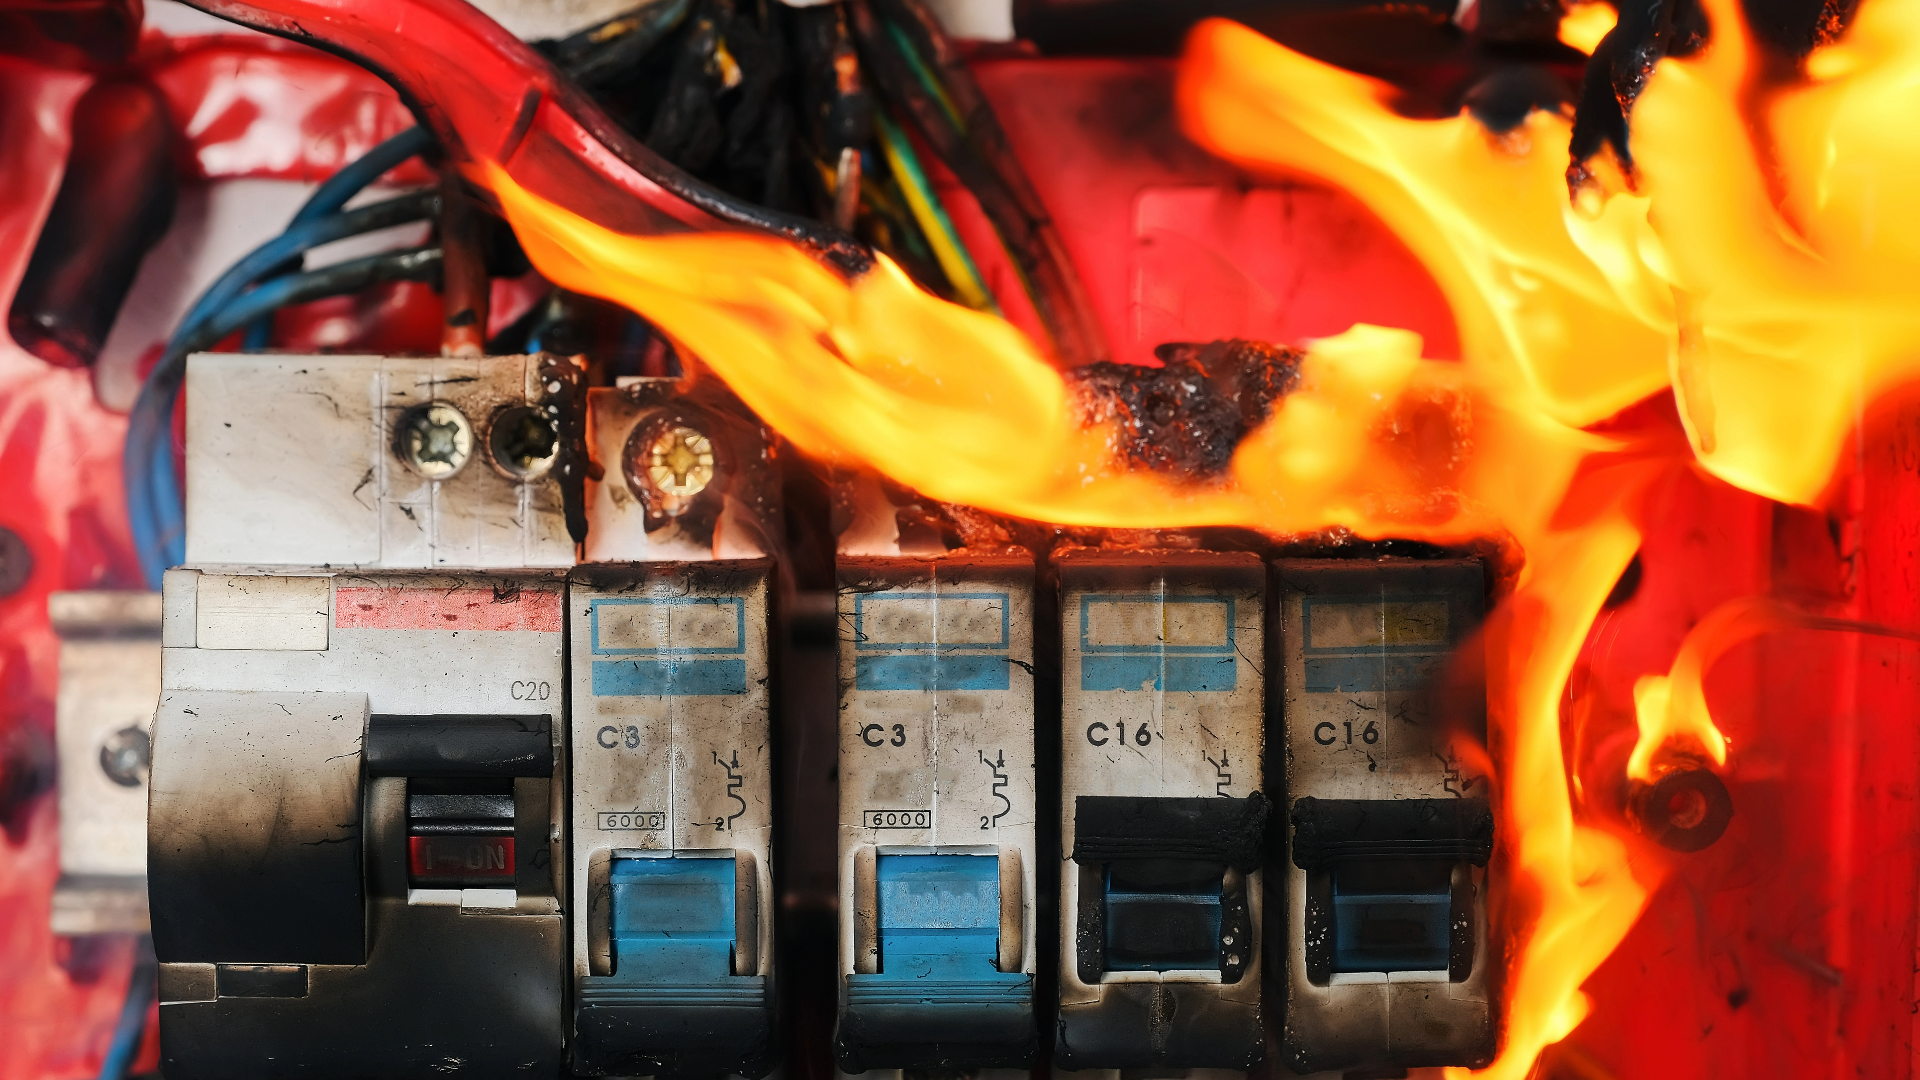 Electrical breakers for lighting circuits have caught fire and the breakers are melting 